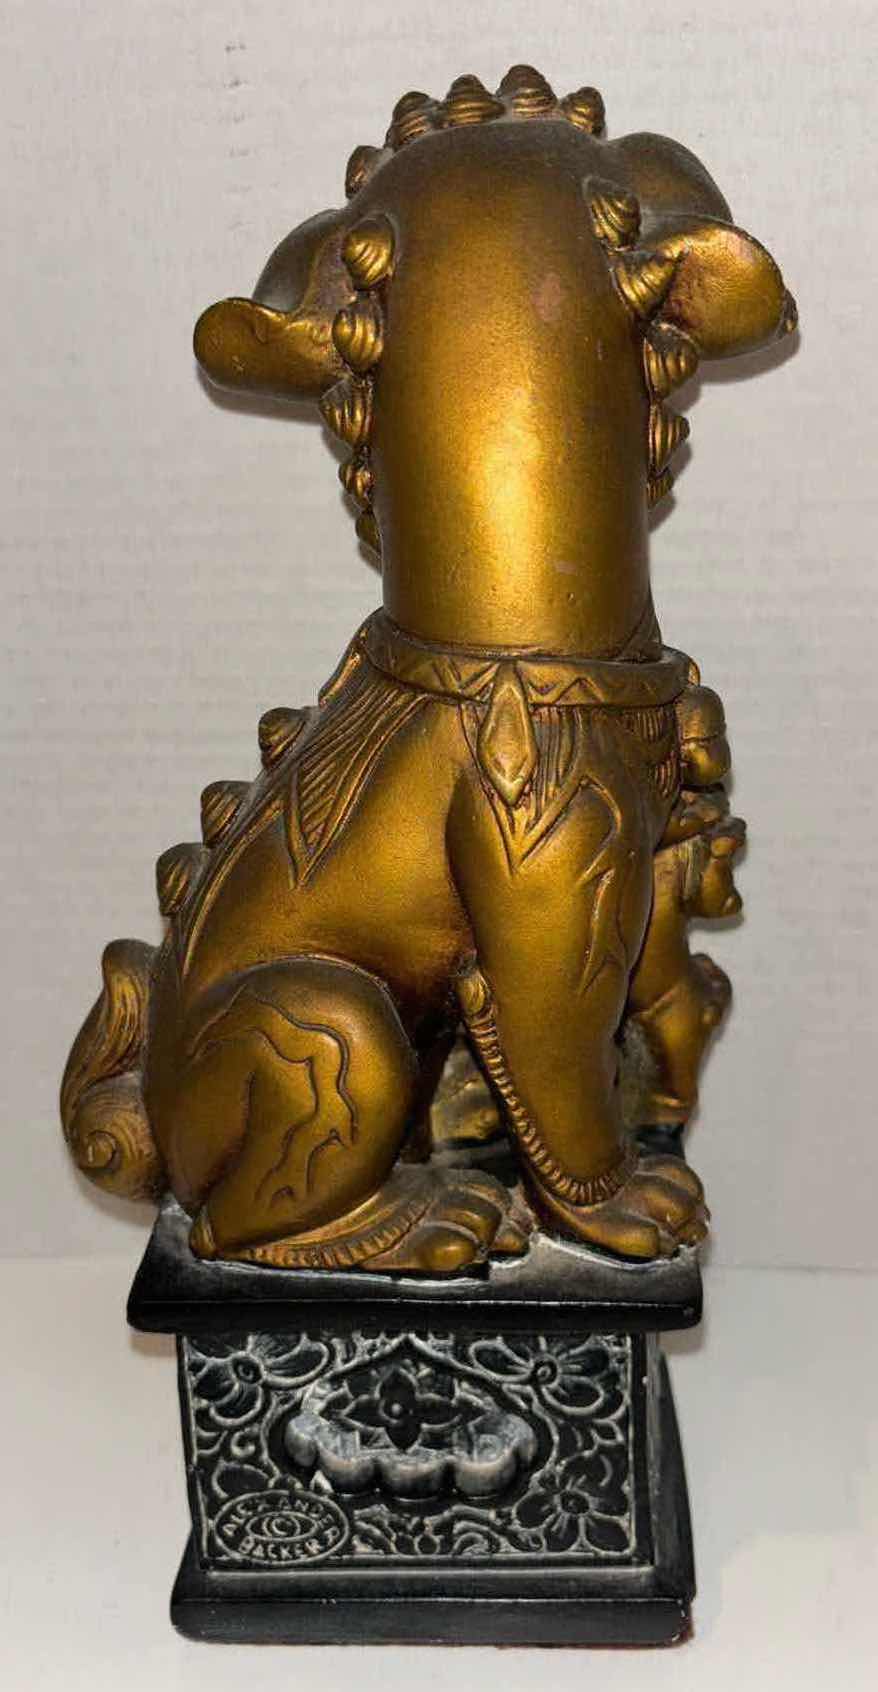 Photo 3 of VINTAGE ABCO HAND-PAINTED MARWAL FOO DOG BOOKEND 1960’S MANTEL DECOR, MOLDED PLASTER